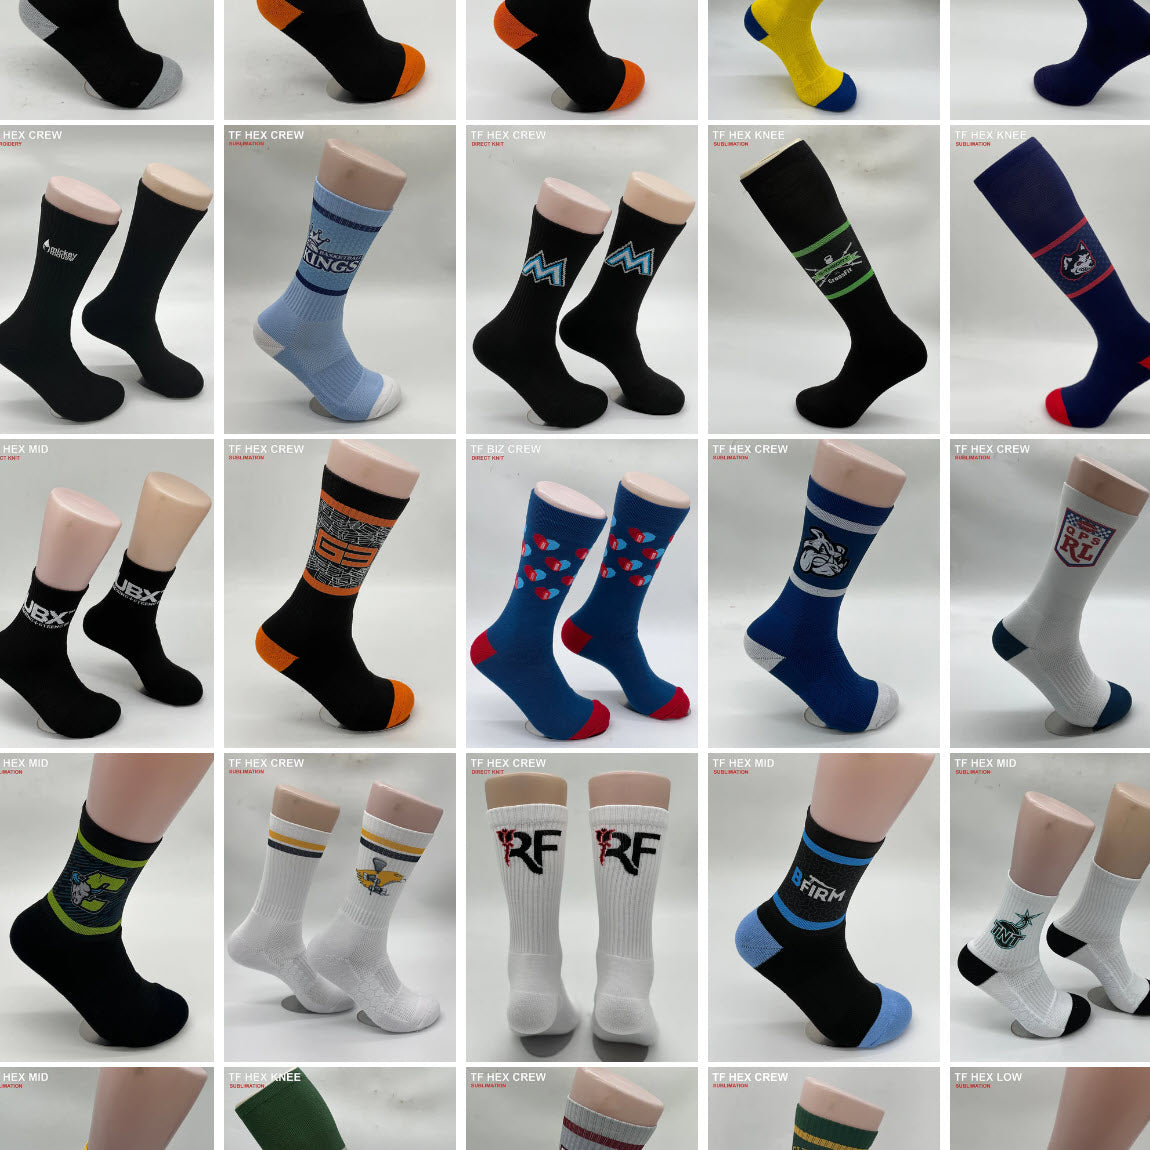 Customising Your Socks - Which method is best?